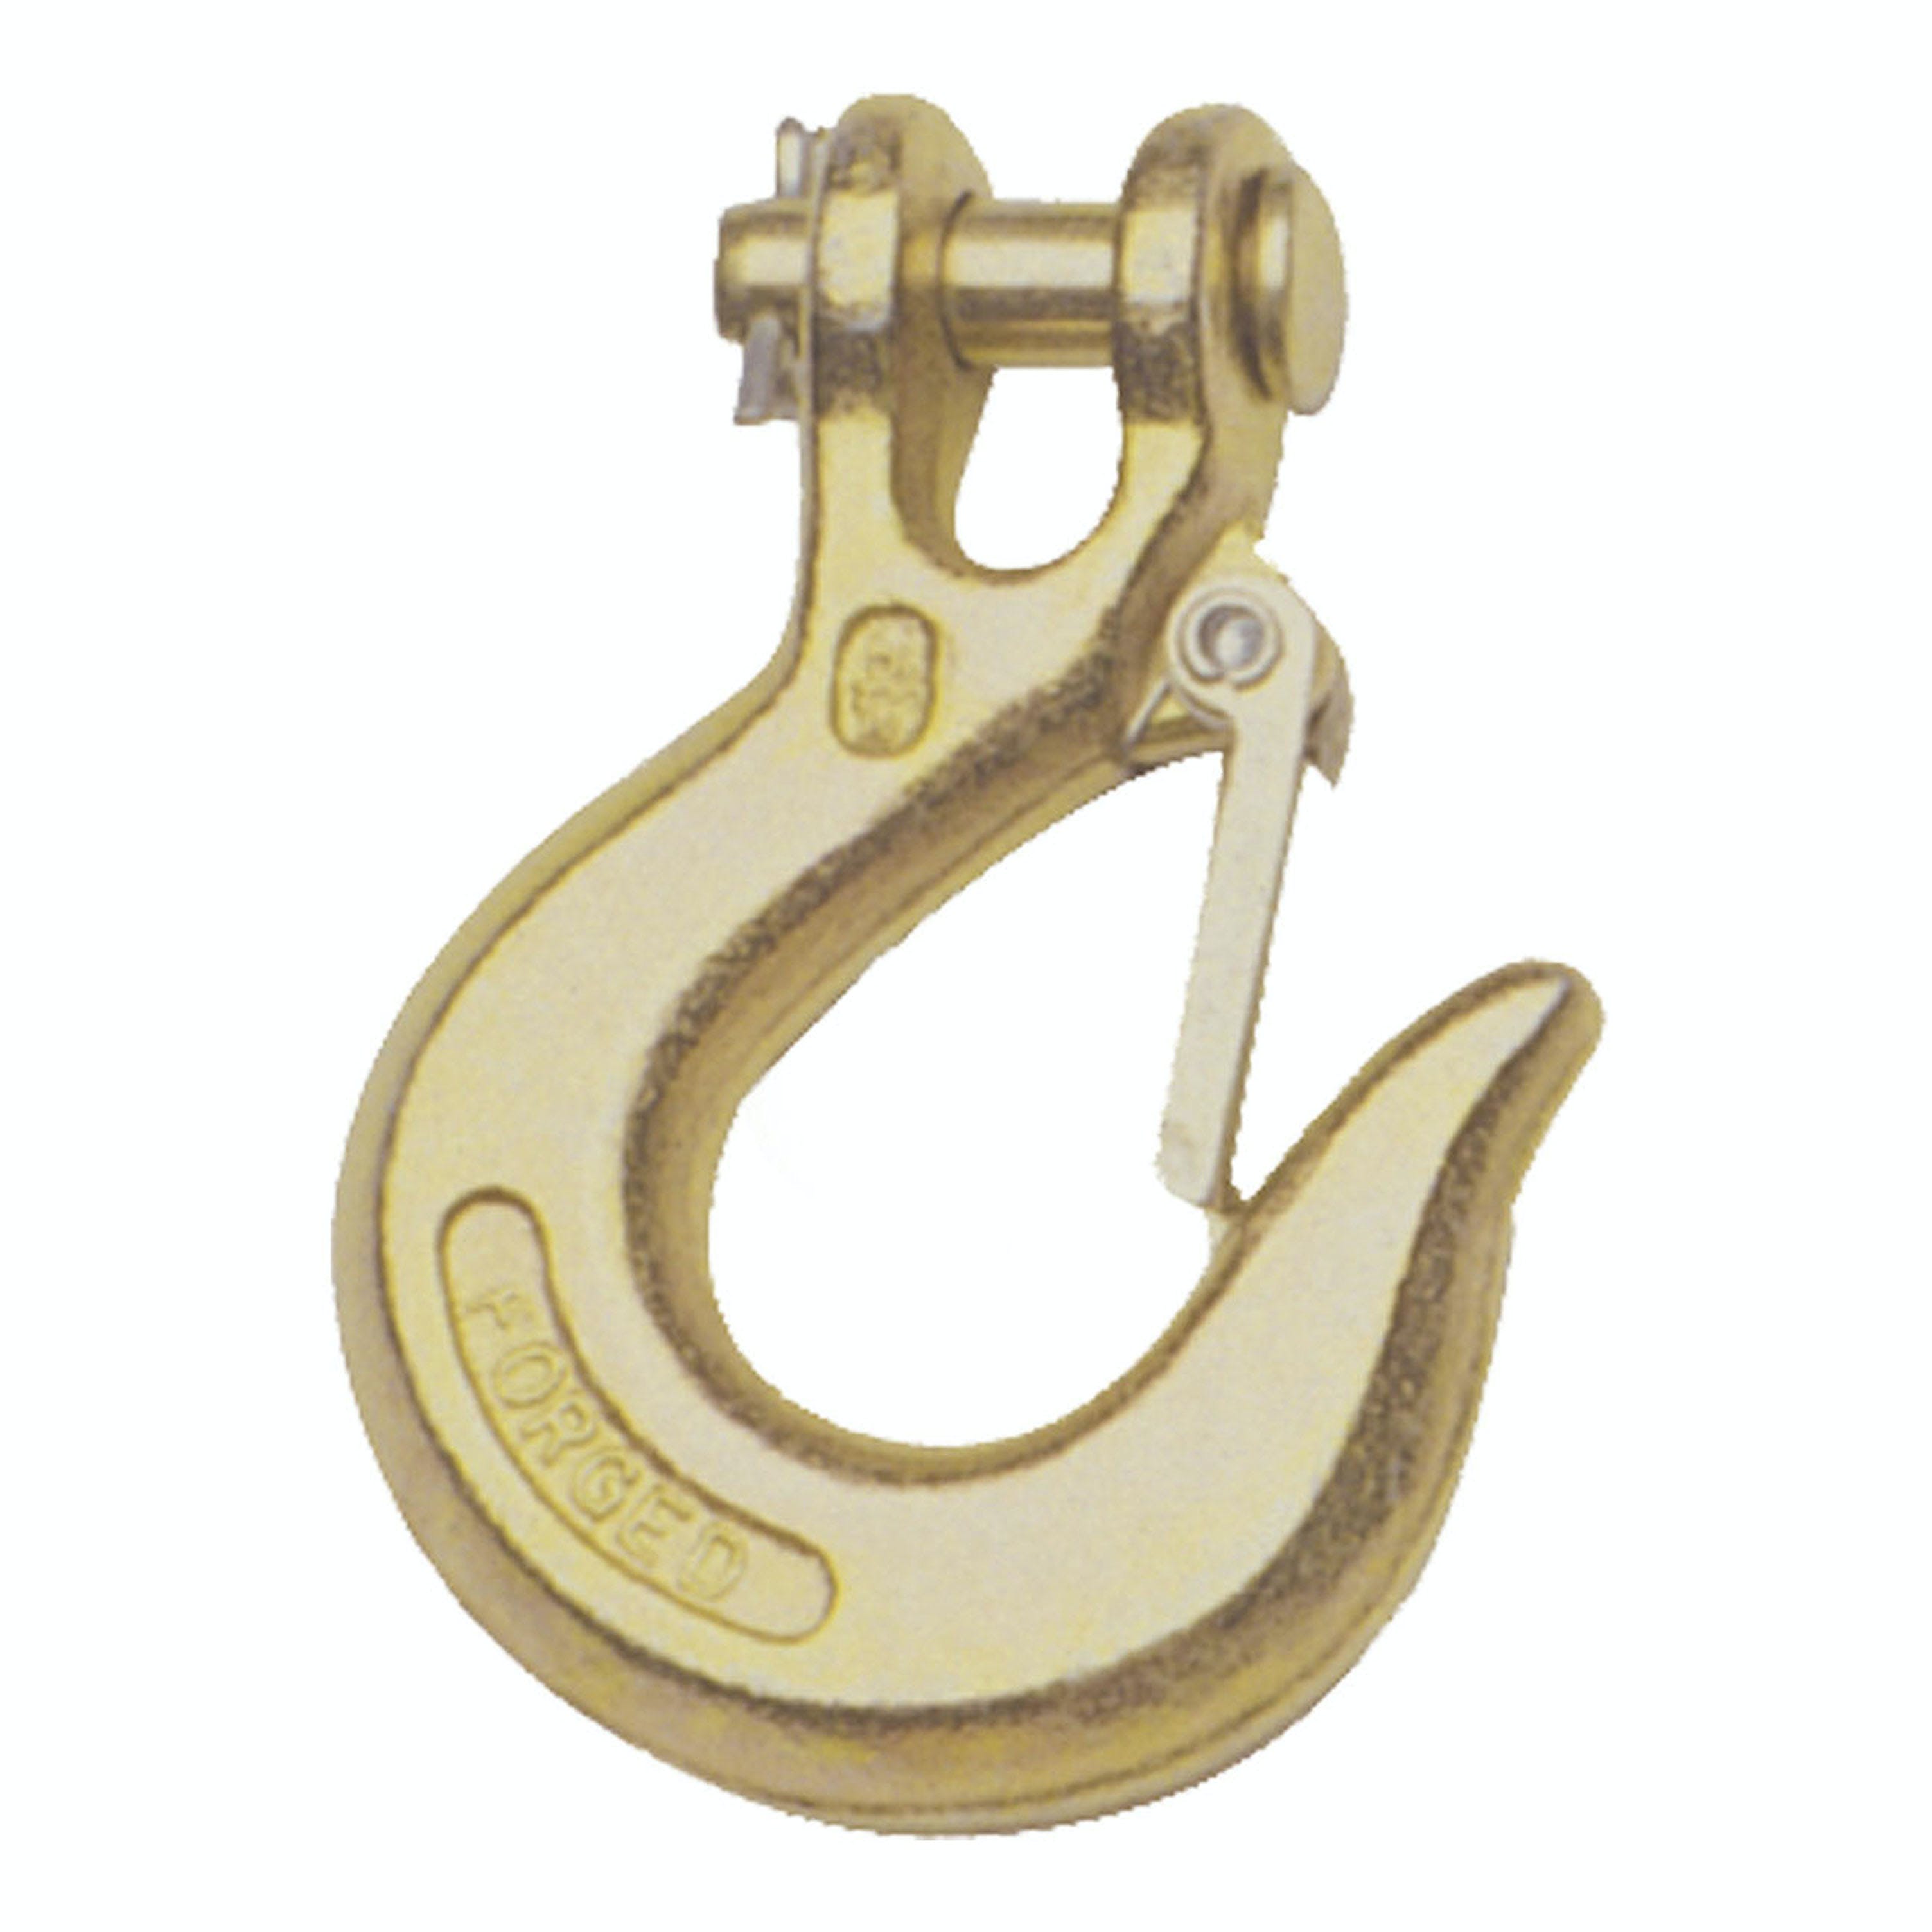 CURT 81900 1/4 Safety Latch Clevis Hook (7,800 lbs, 1/4 Pin)